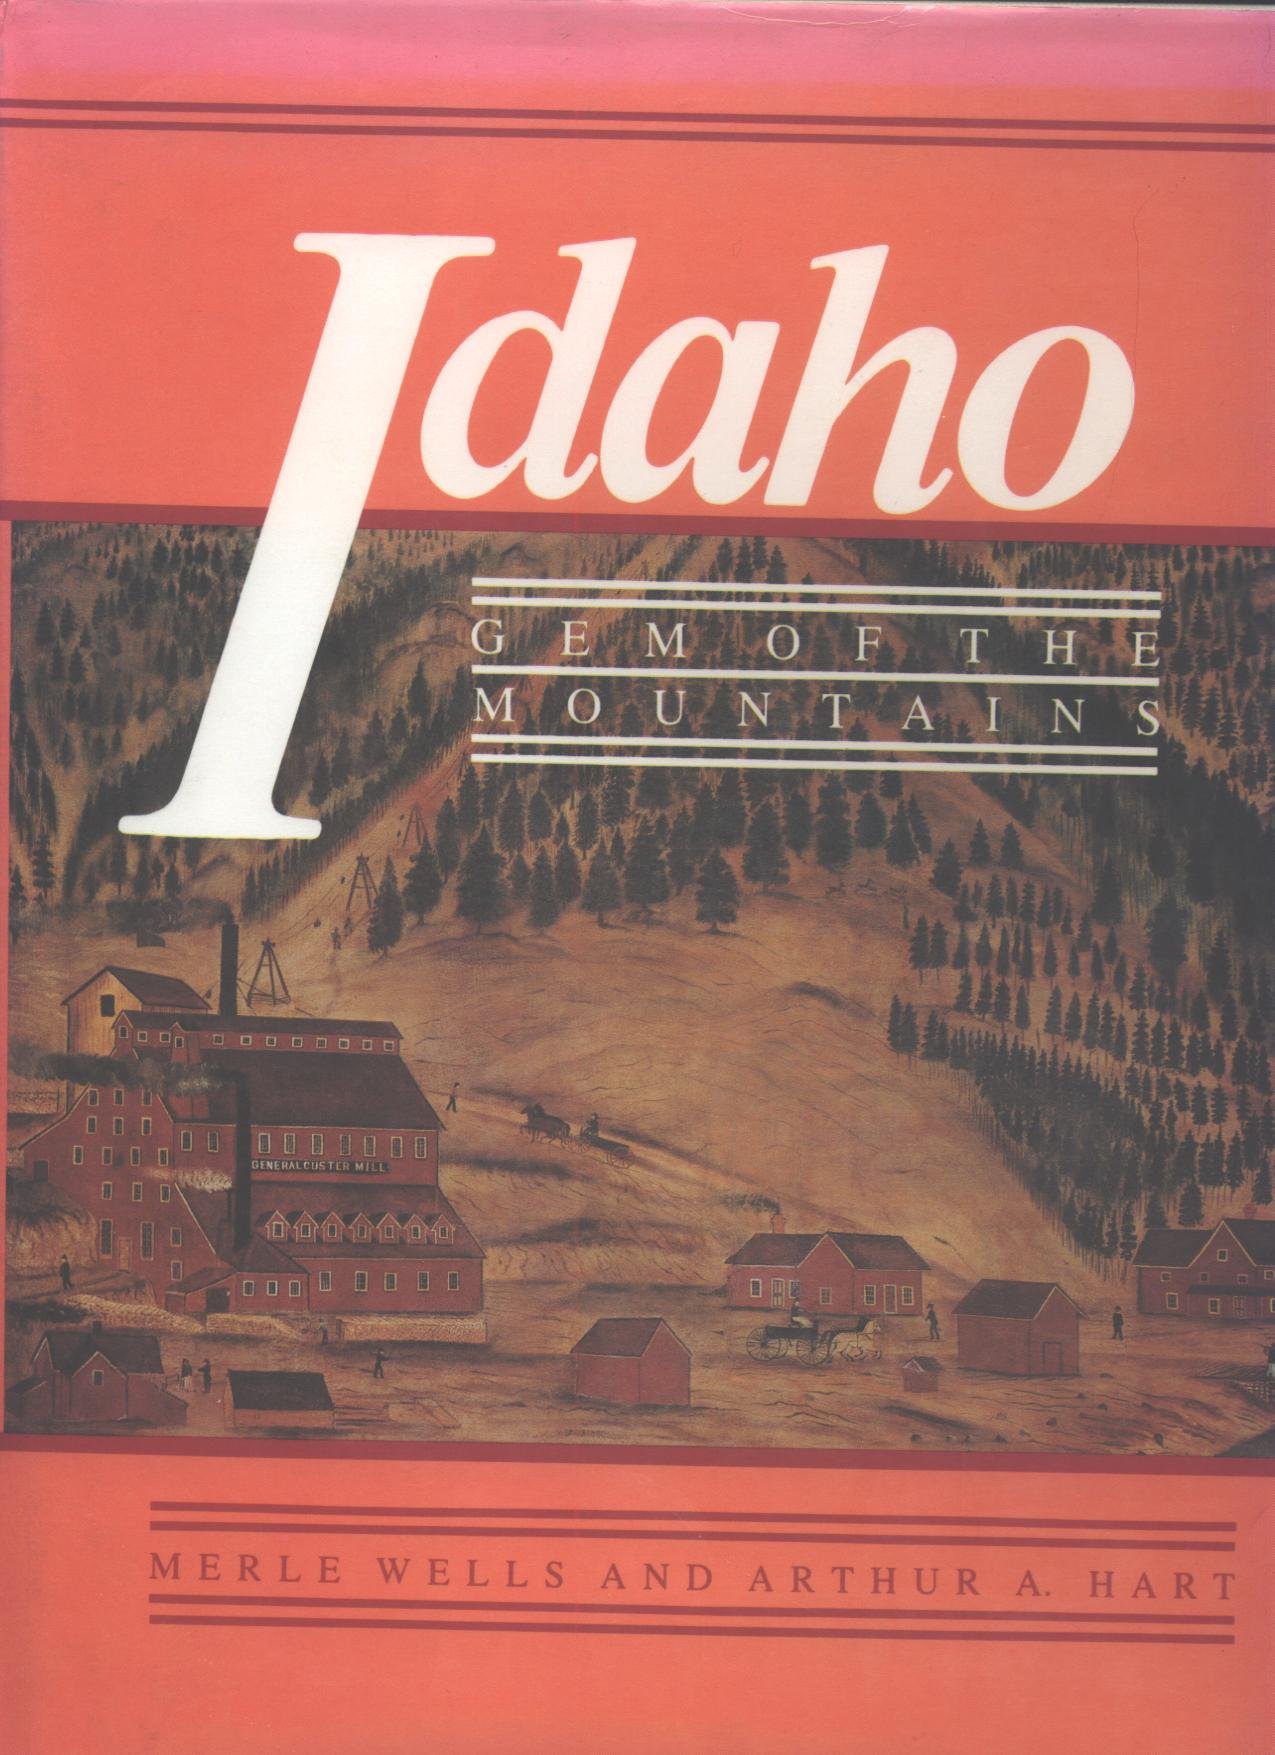 Idaho, gem of the mountains (book cover)